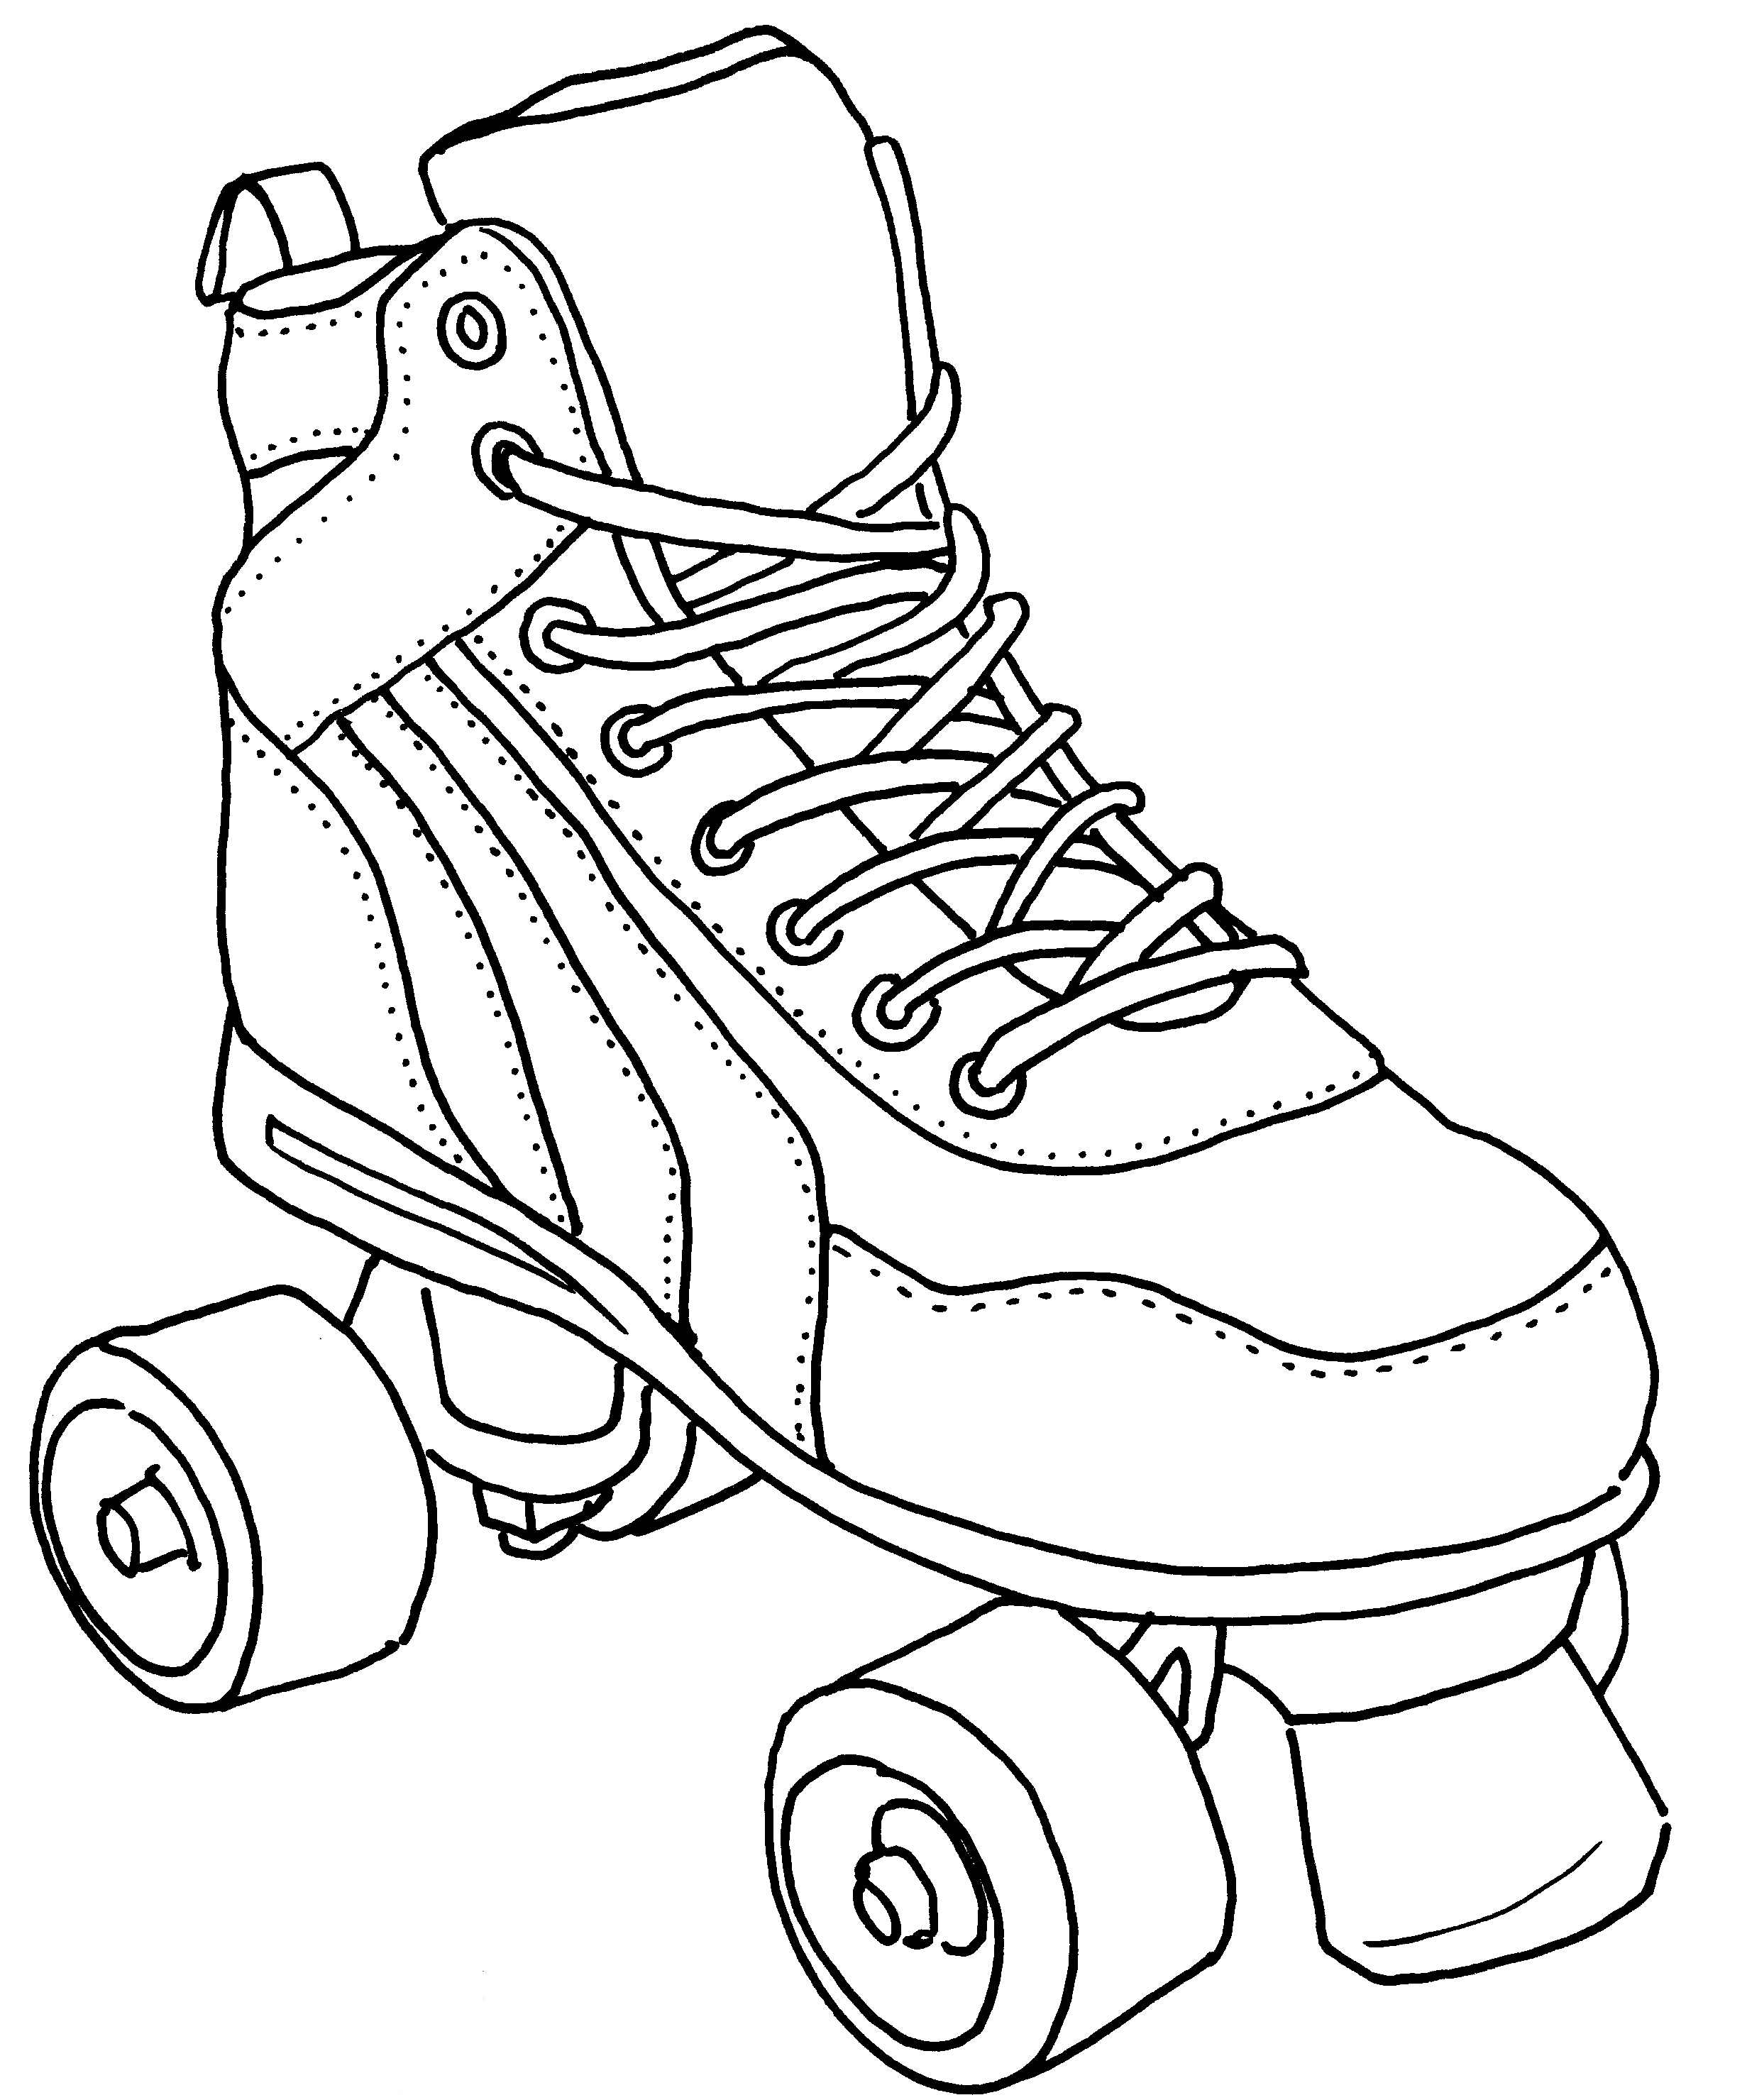 Image 2   Rollerboot   Click Image To Download